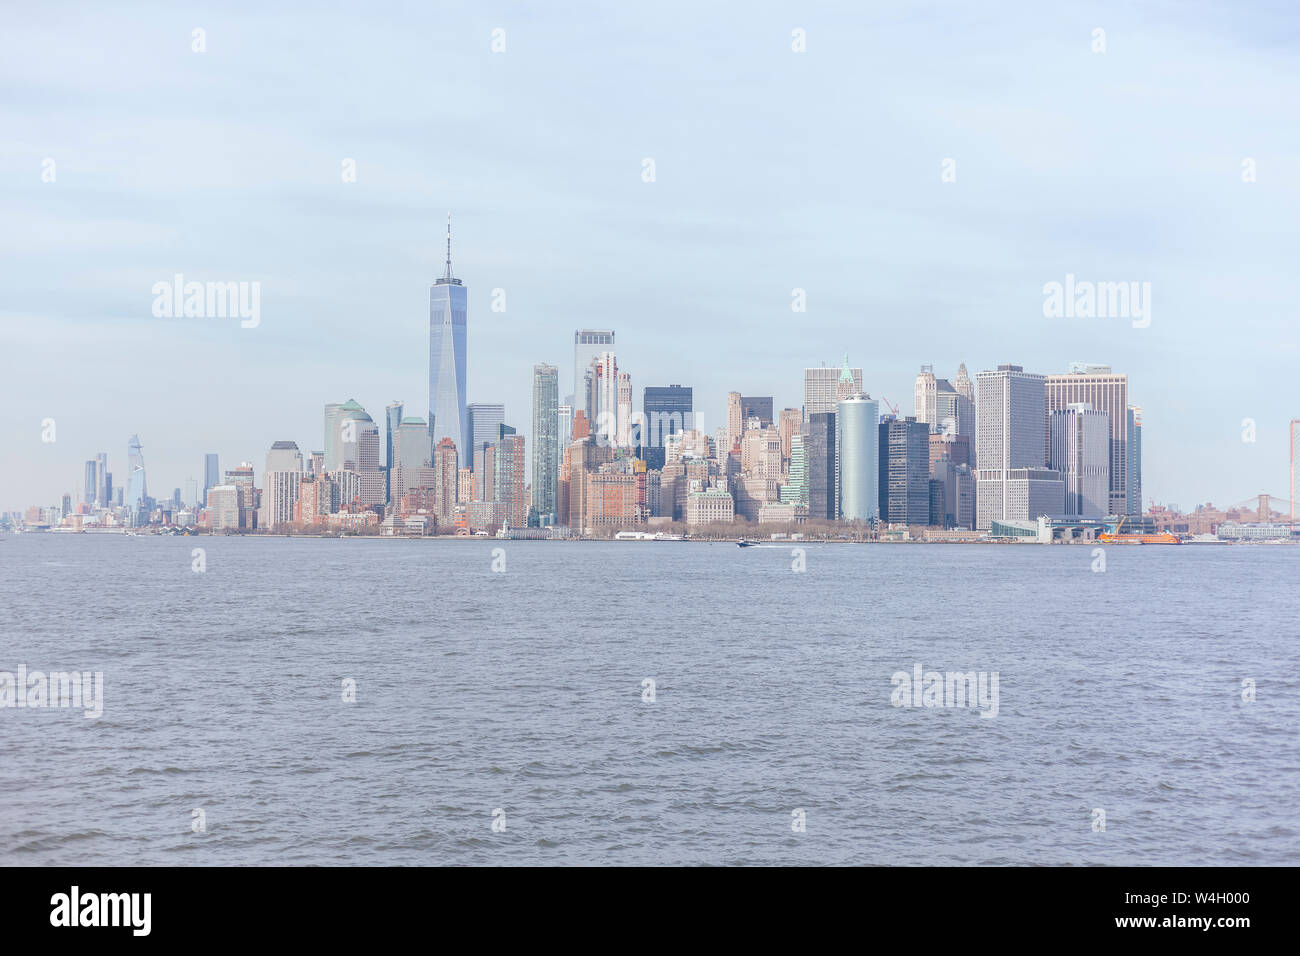 Skyline at the waterfront with One World Trade Center seen from Upper New York Bay, Manhattan, New York City, USA Stock Photo